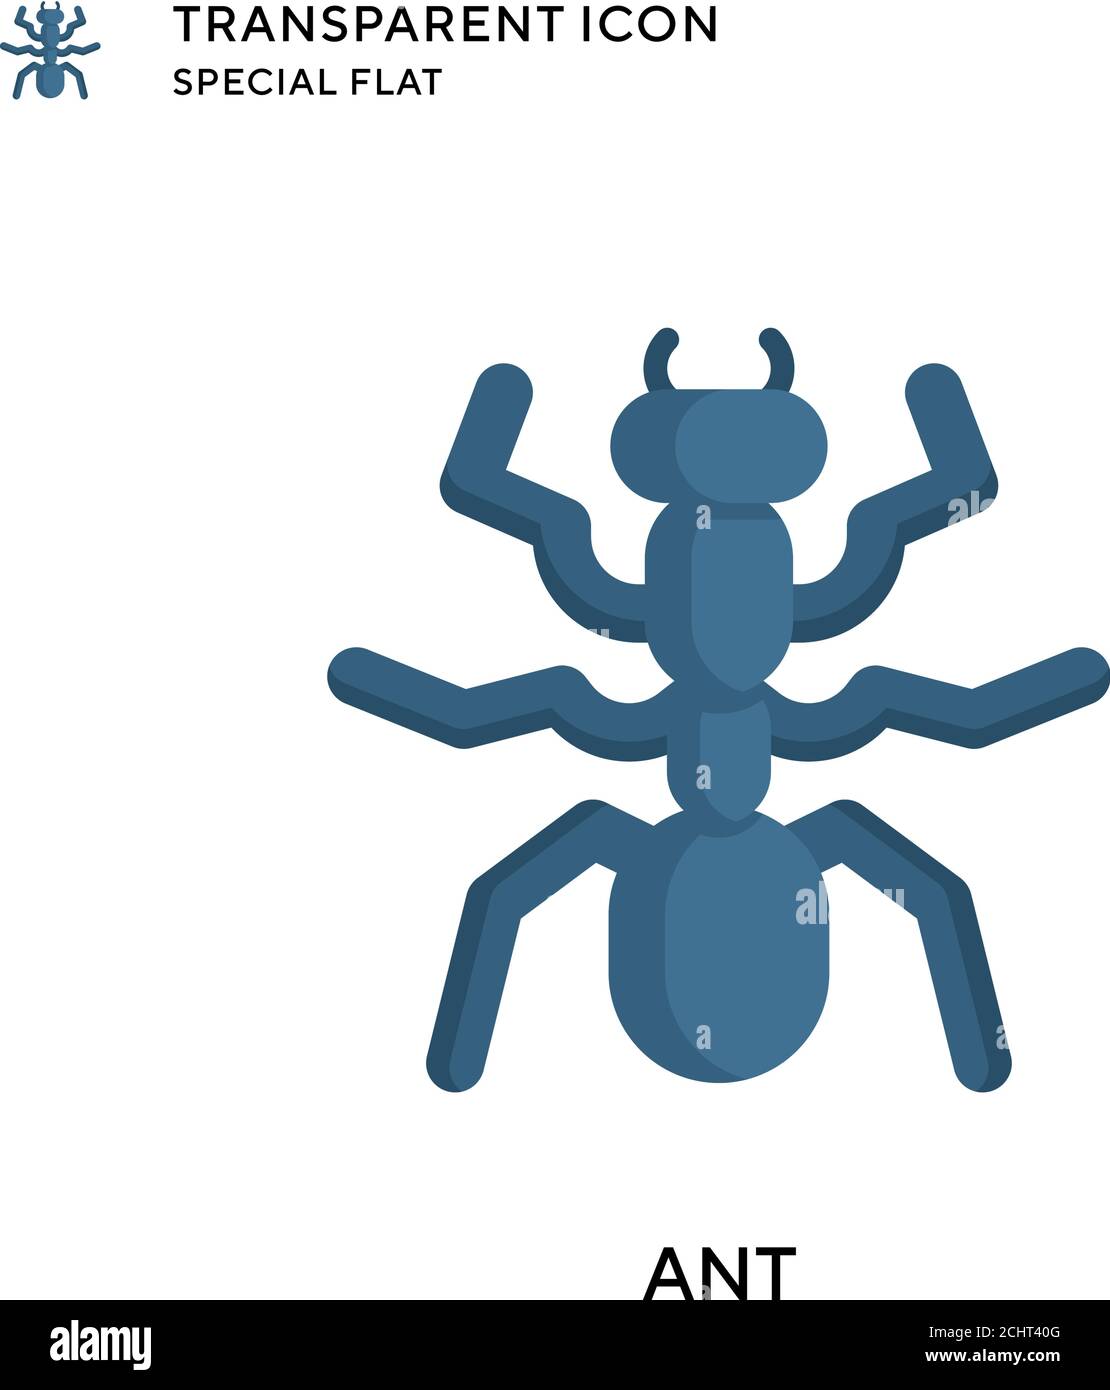 Ant vector icon. Flat style illustration. EPS 10 vector. Stock Vector